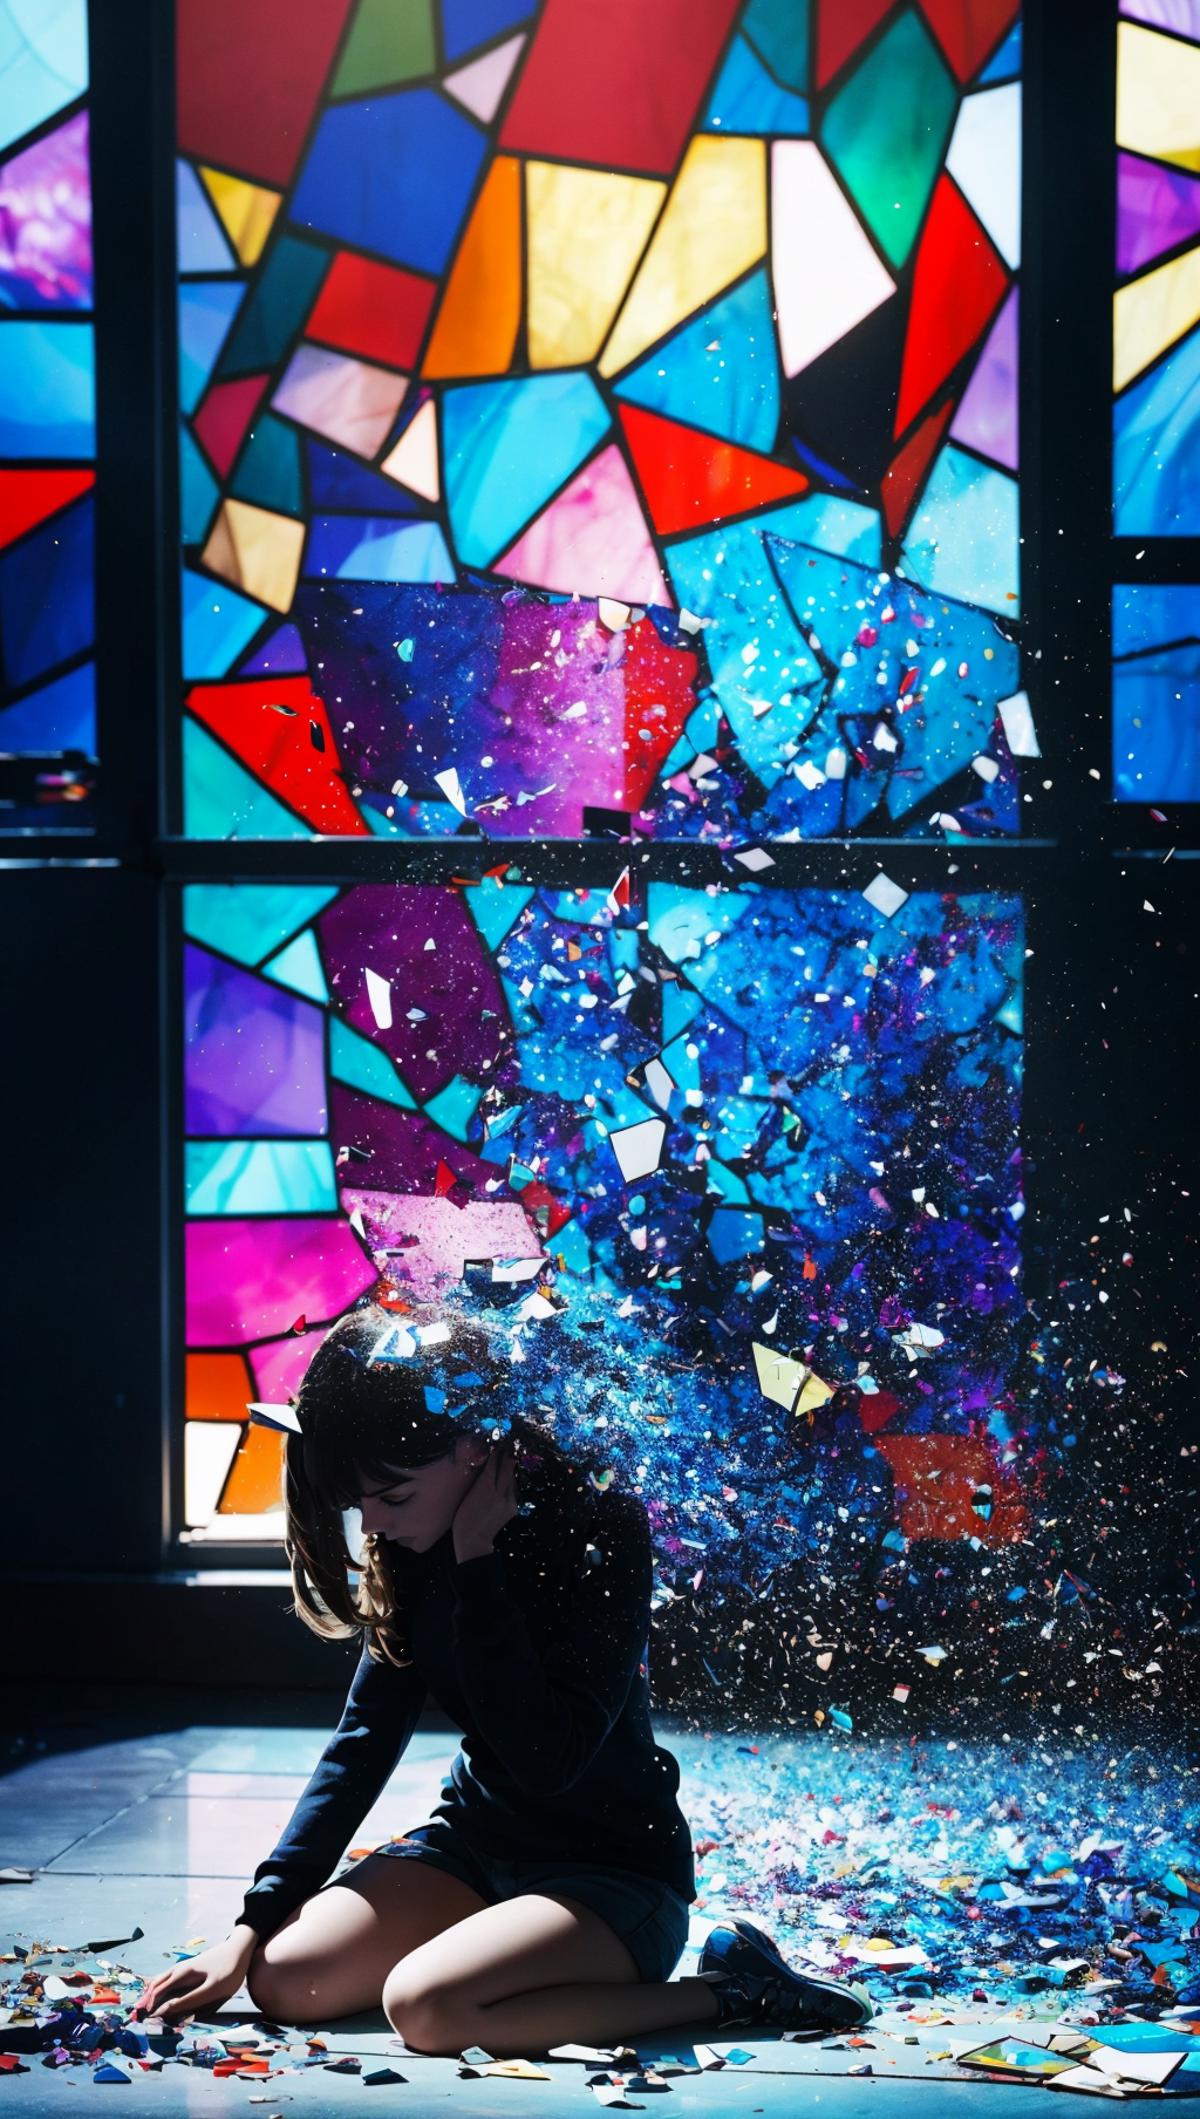 A girl sitting in front of a stained glass window.